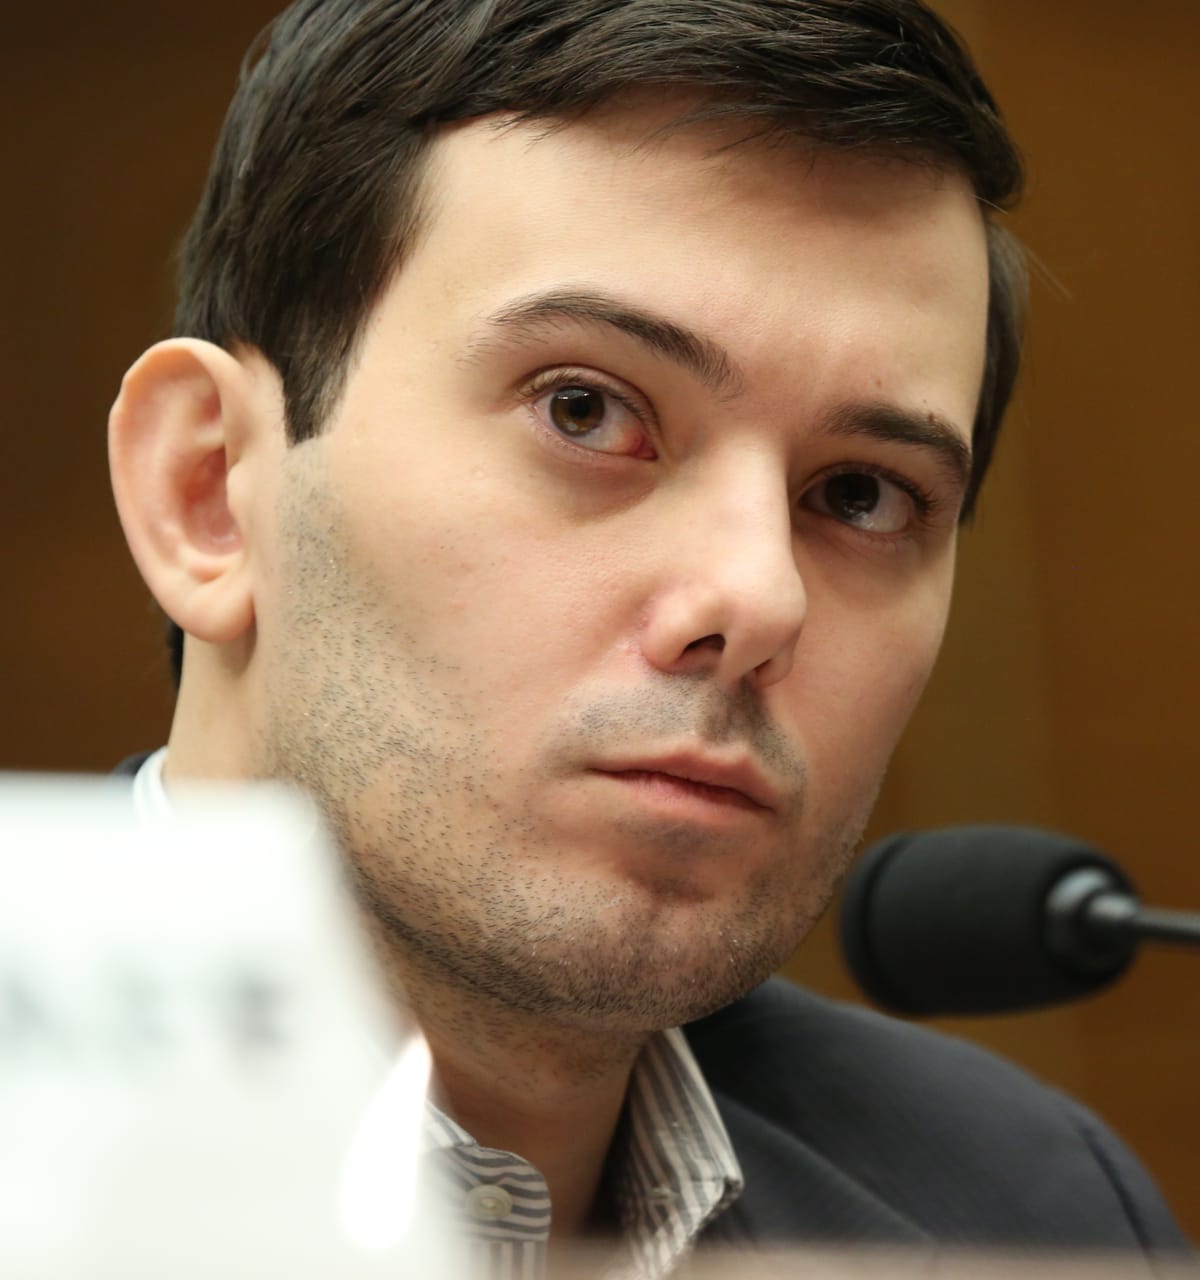 Who Would Name a Healthcare Award after Martin Shkreli?